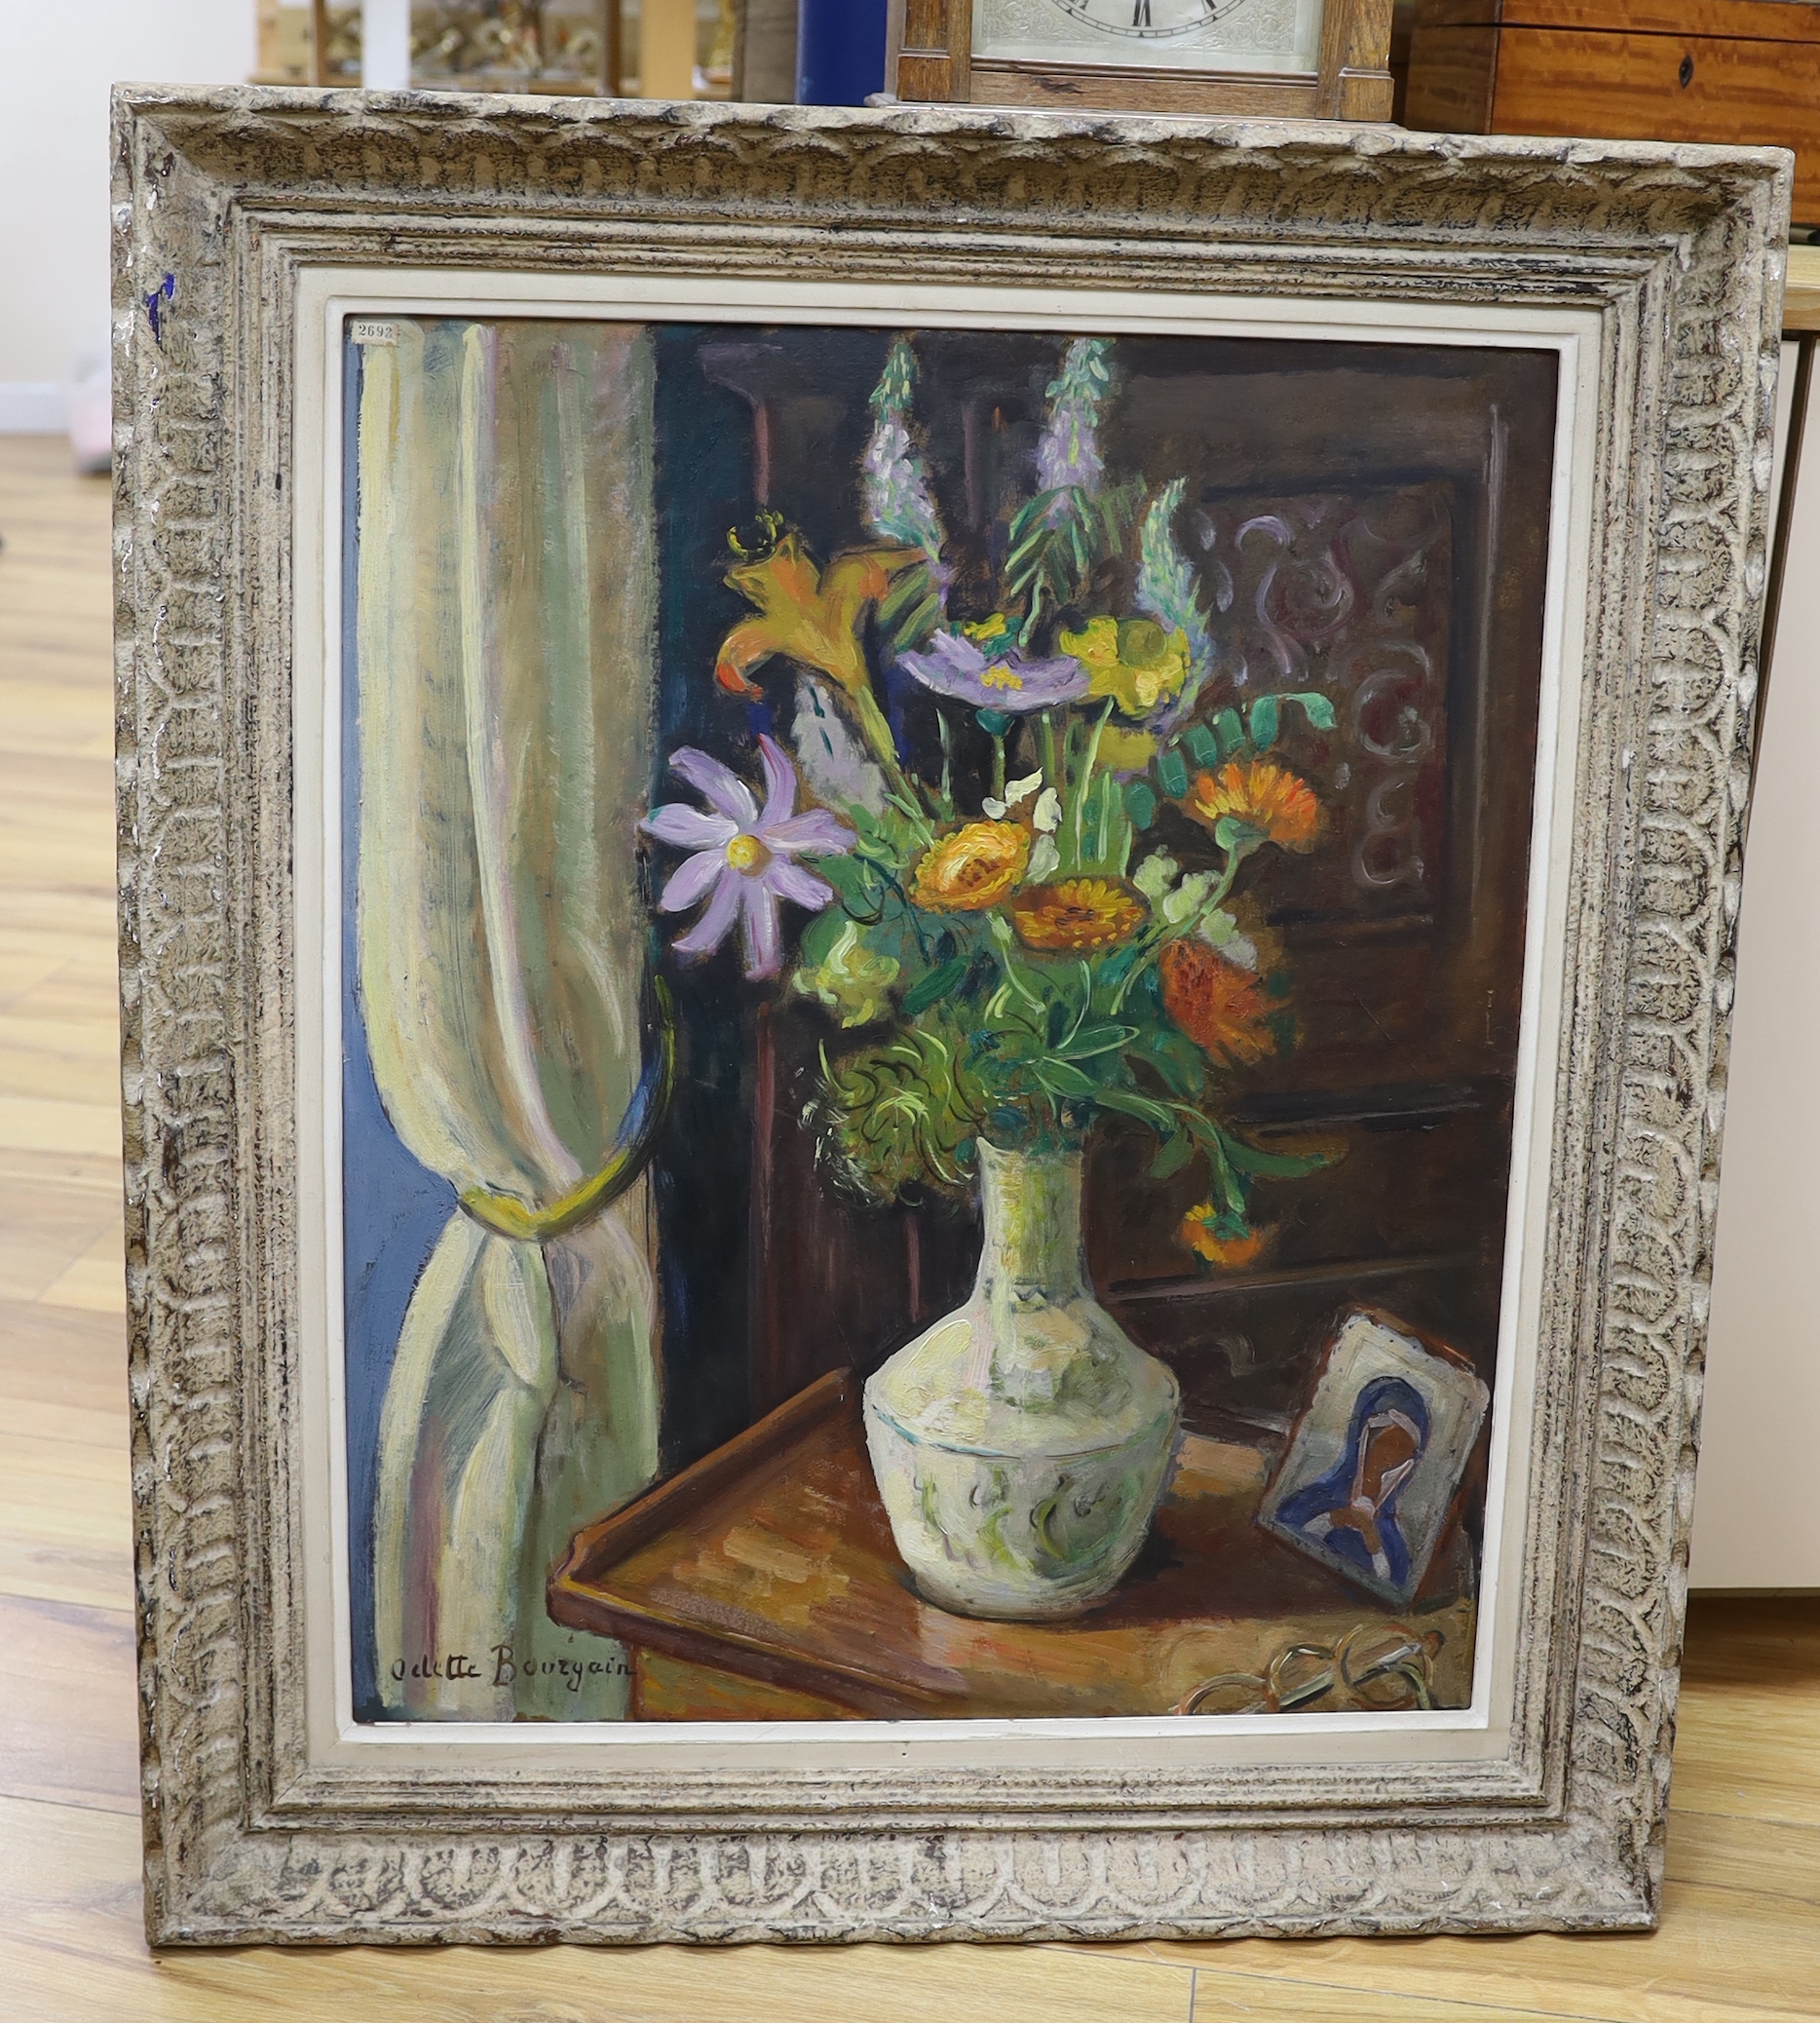 Odette Bourgain (French, 19/20th. C), oil on board, still life of flowers in a vase, signed, inscribed verso, 64 x 53cm